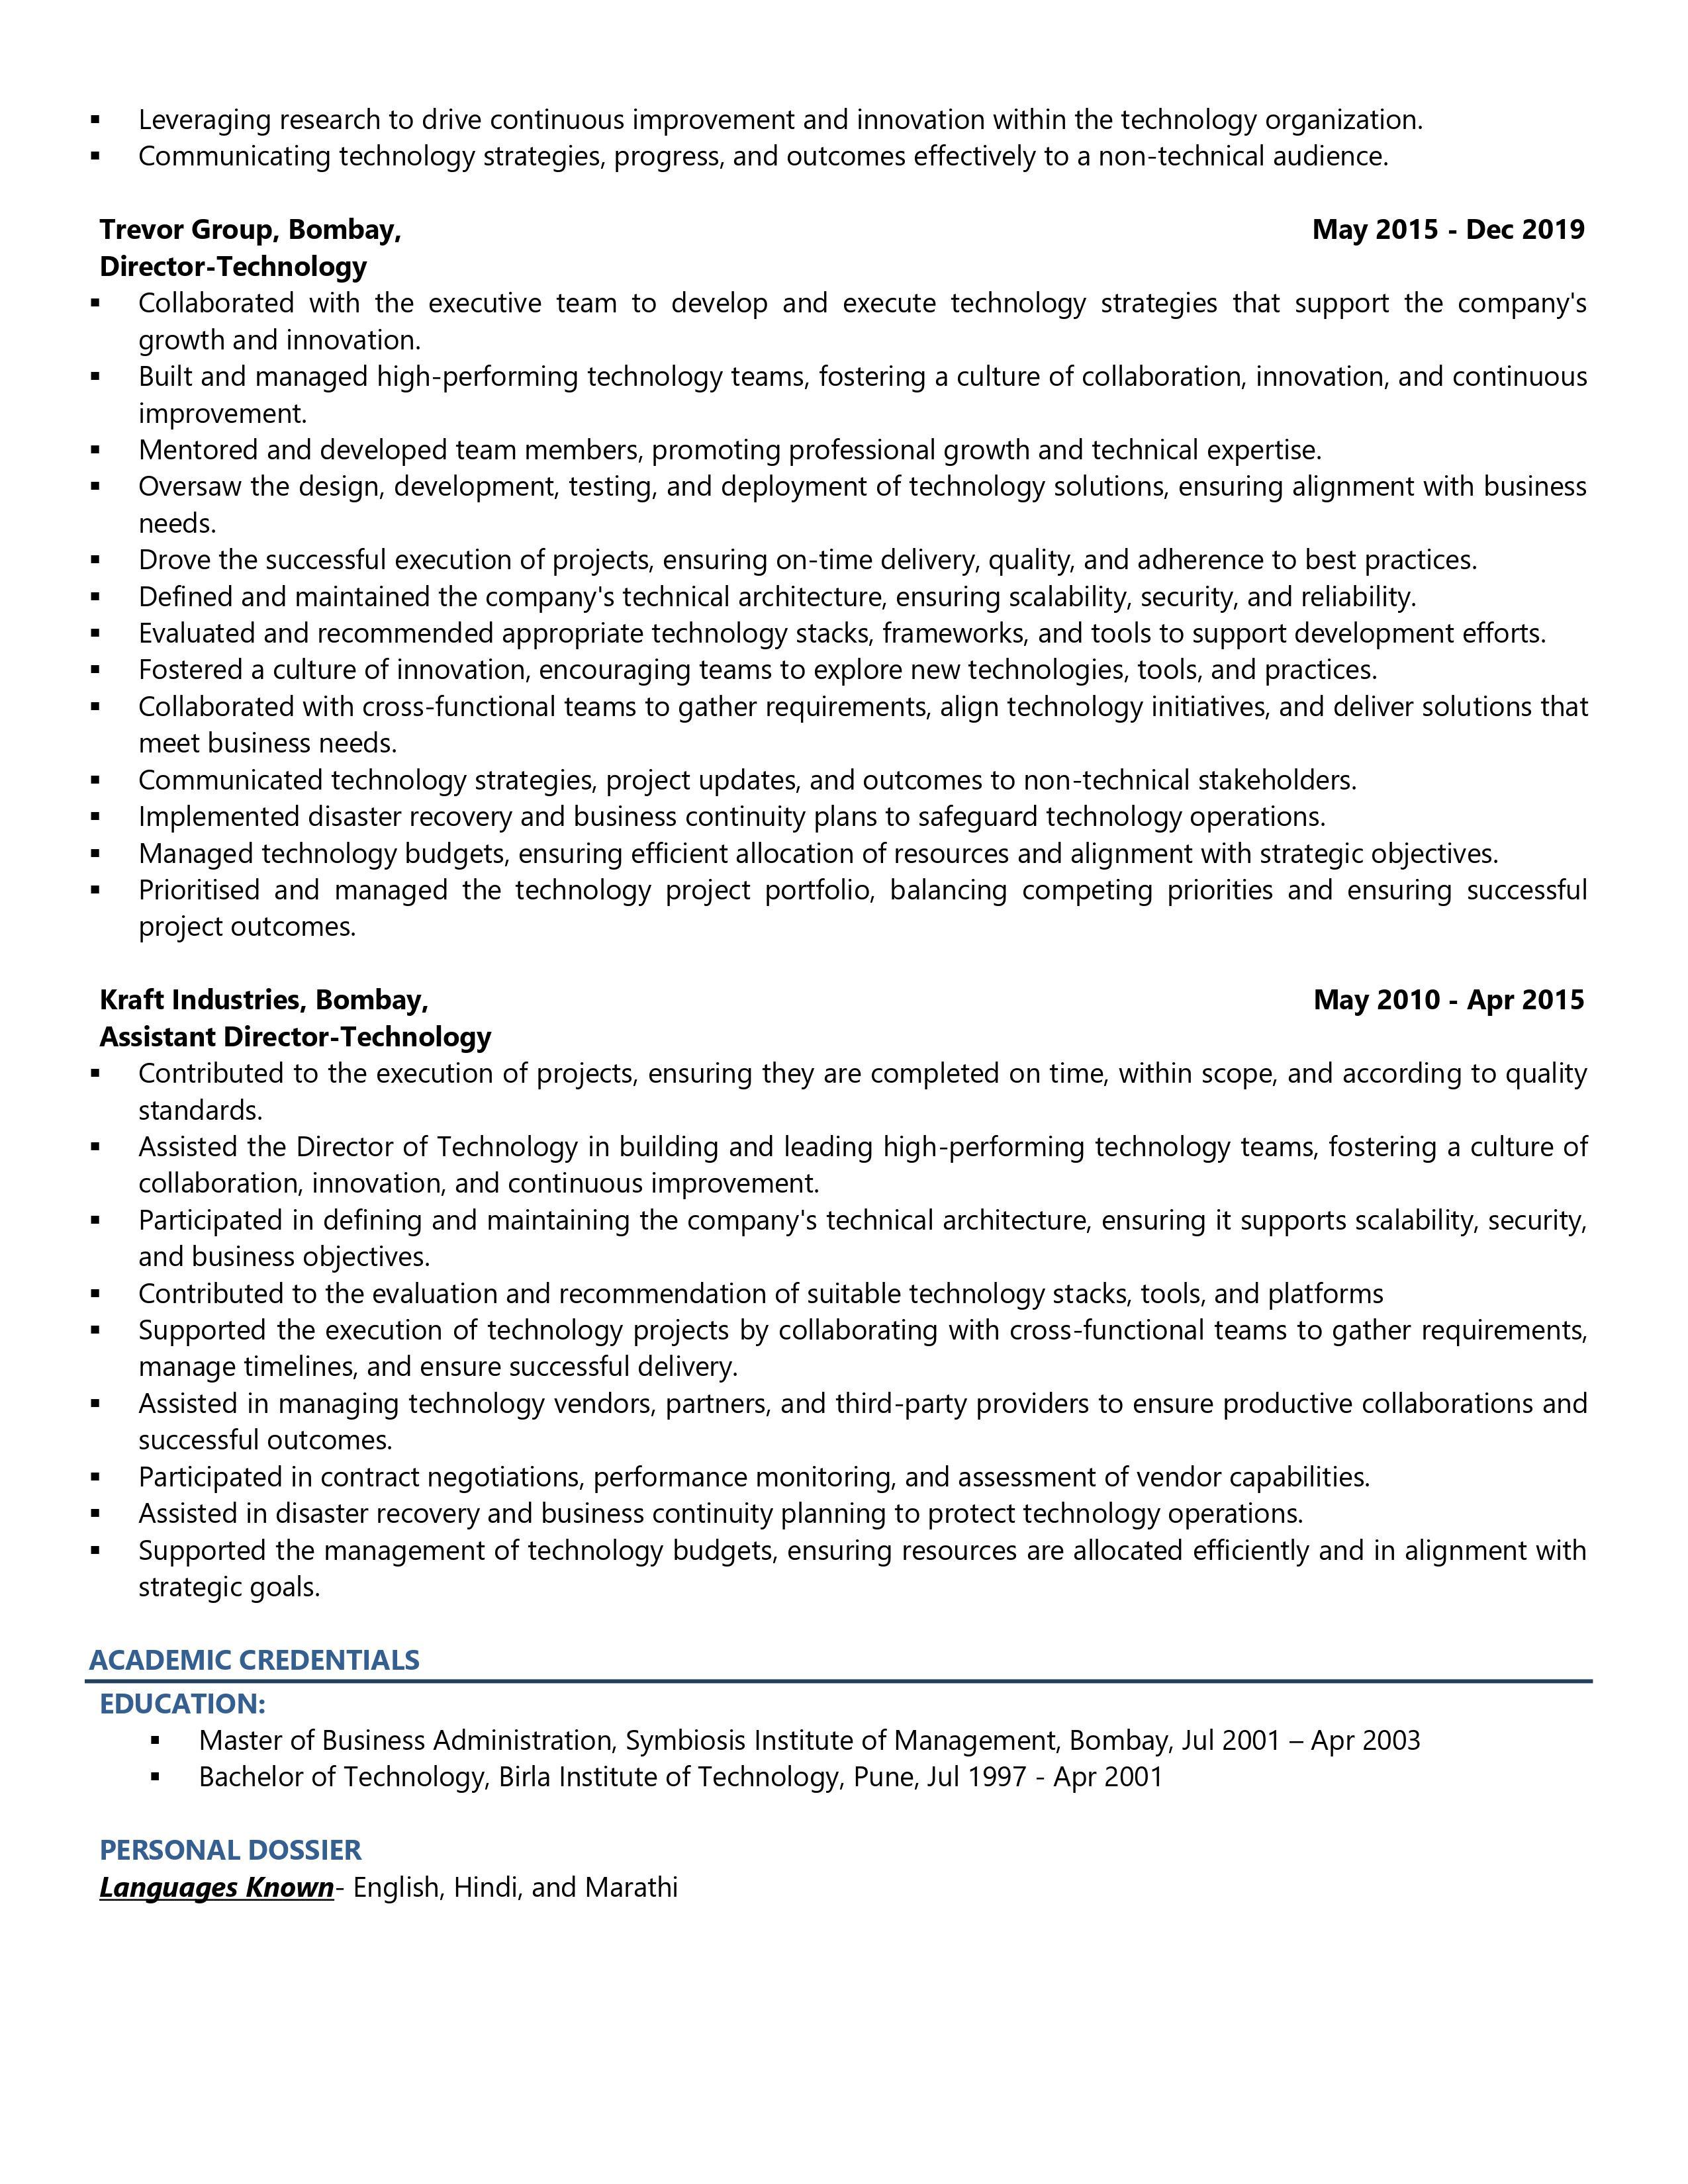 Chief Technology Officer (CTO) - Resume Example & Template